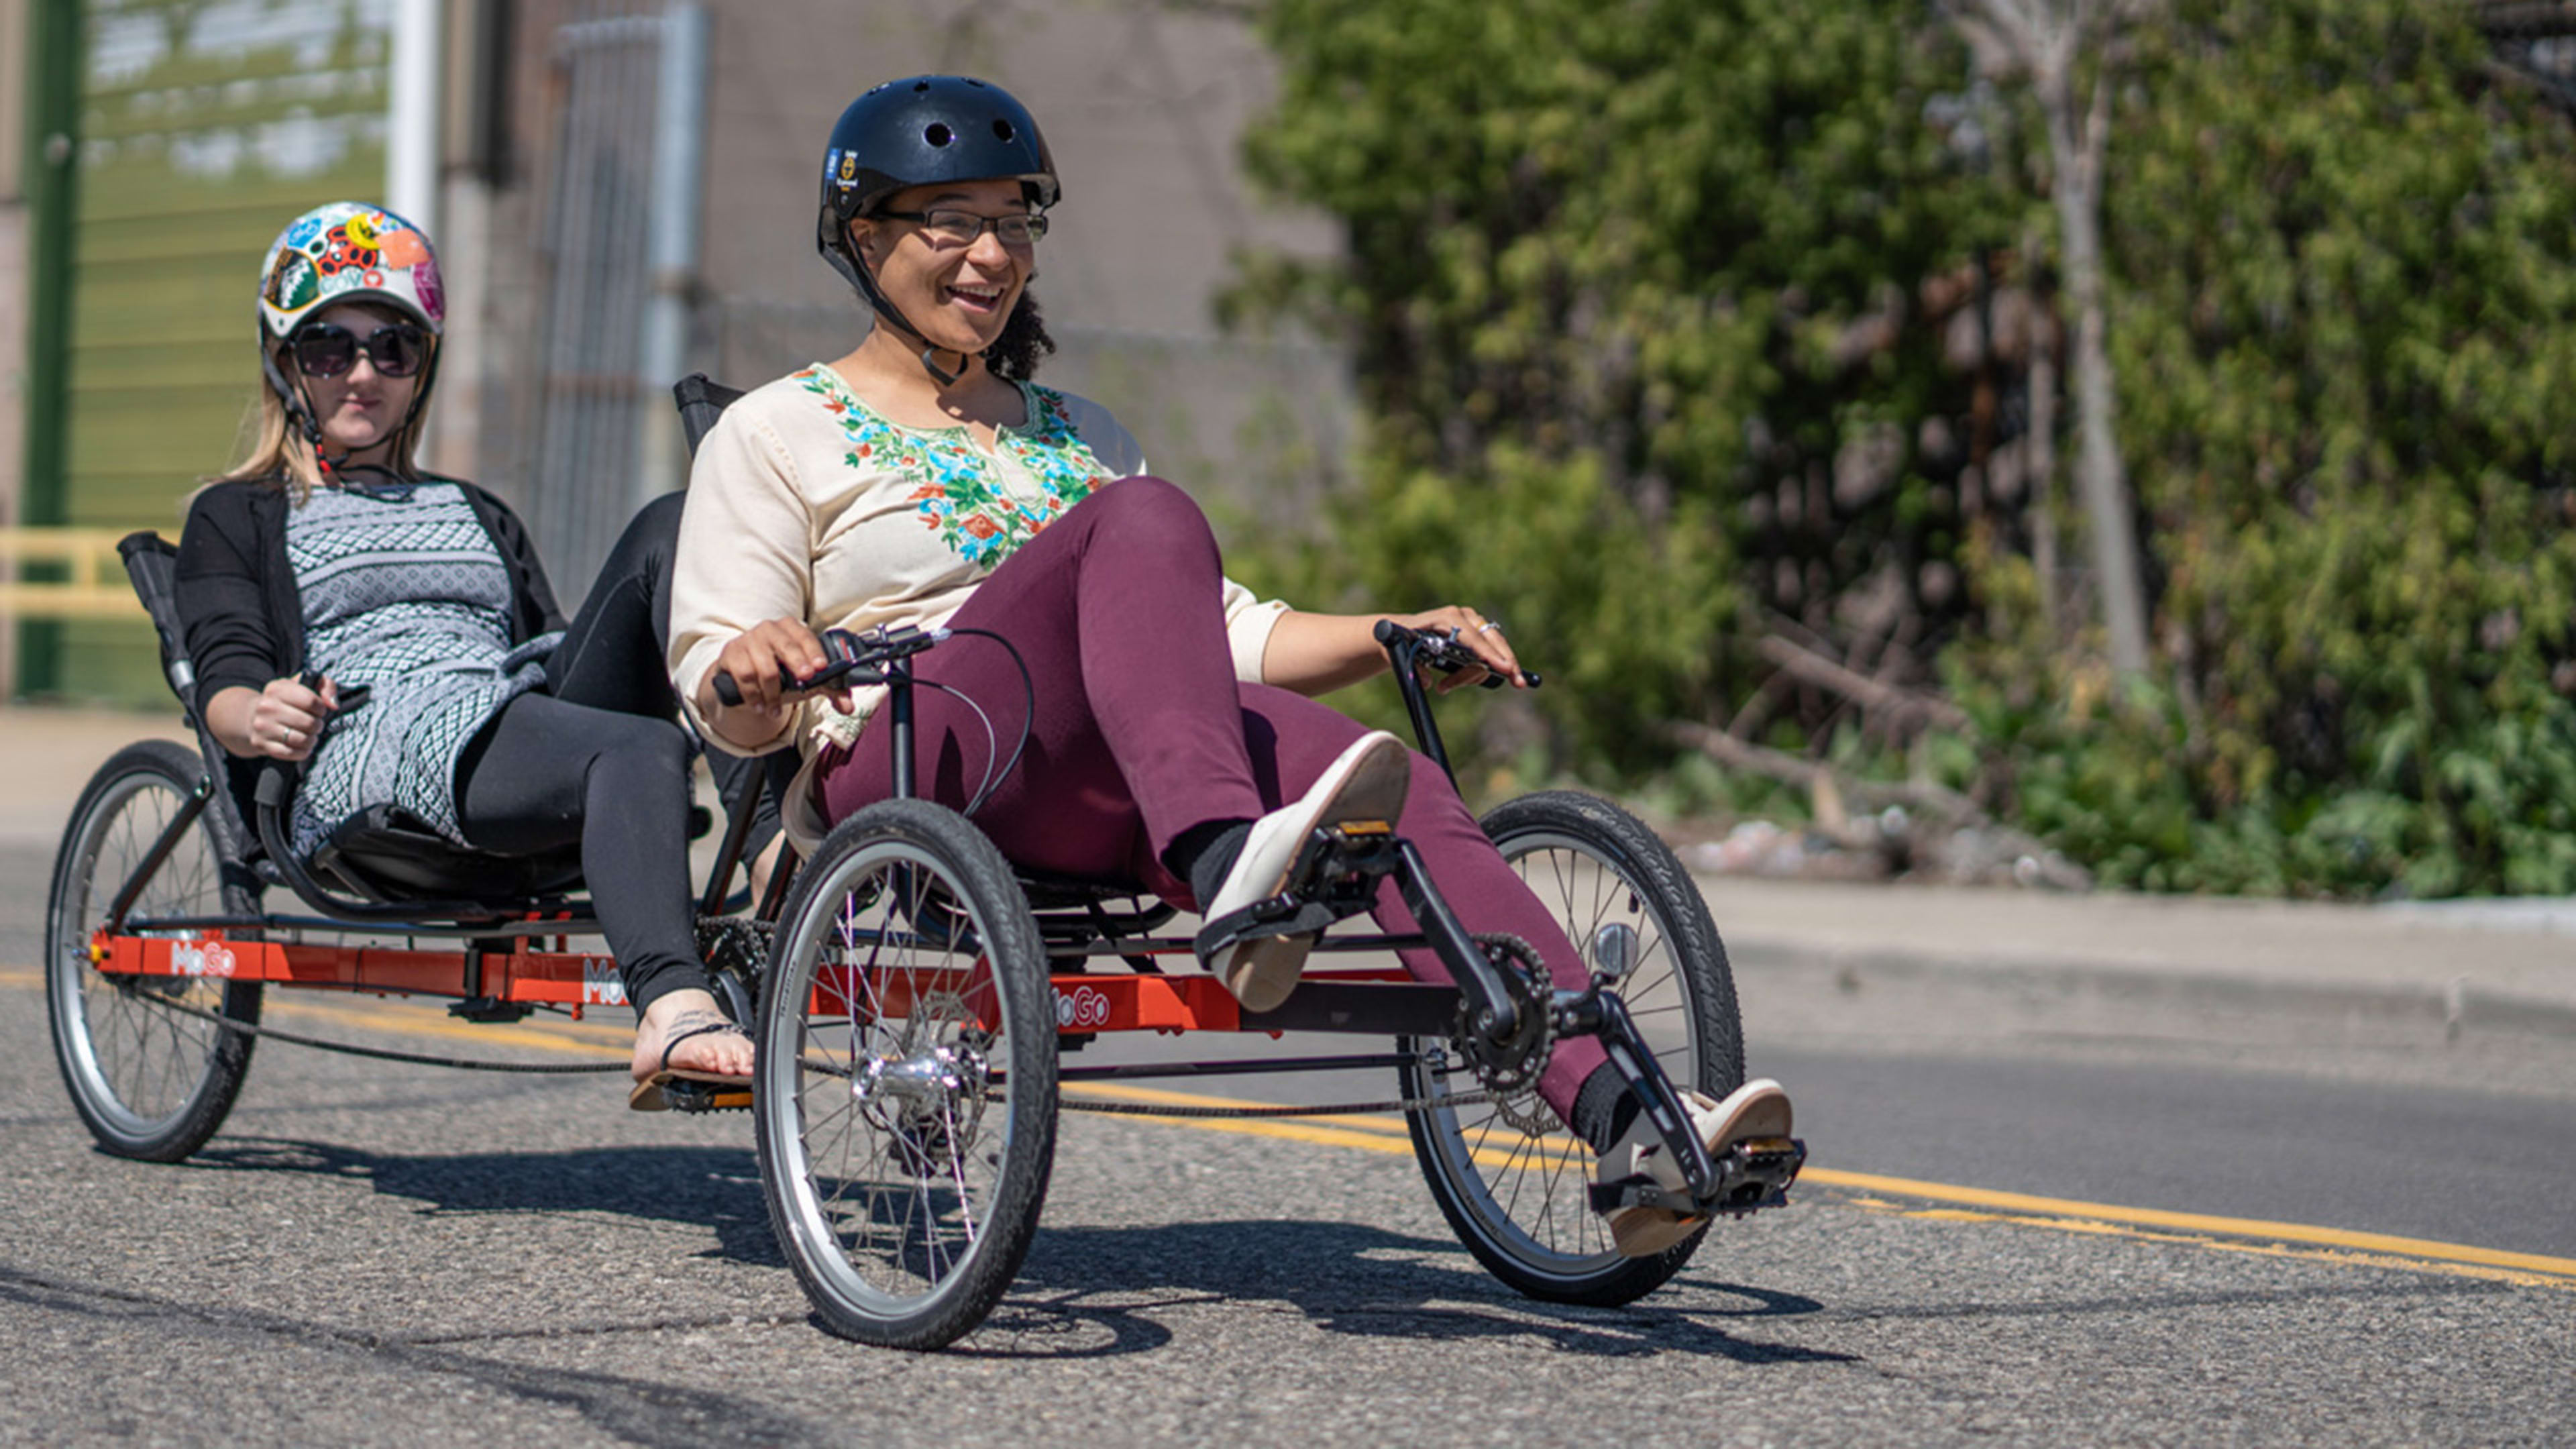 How to build a bike-share system for people of all abilities